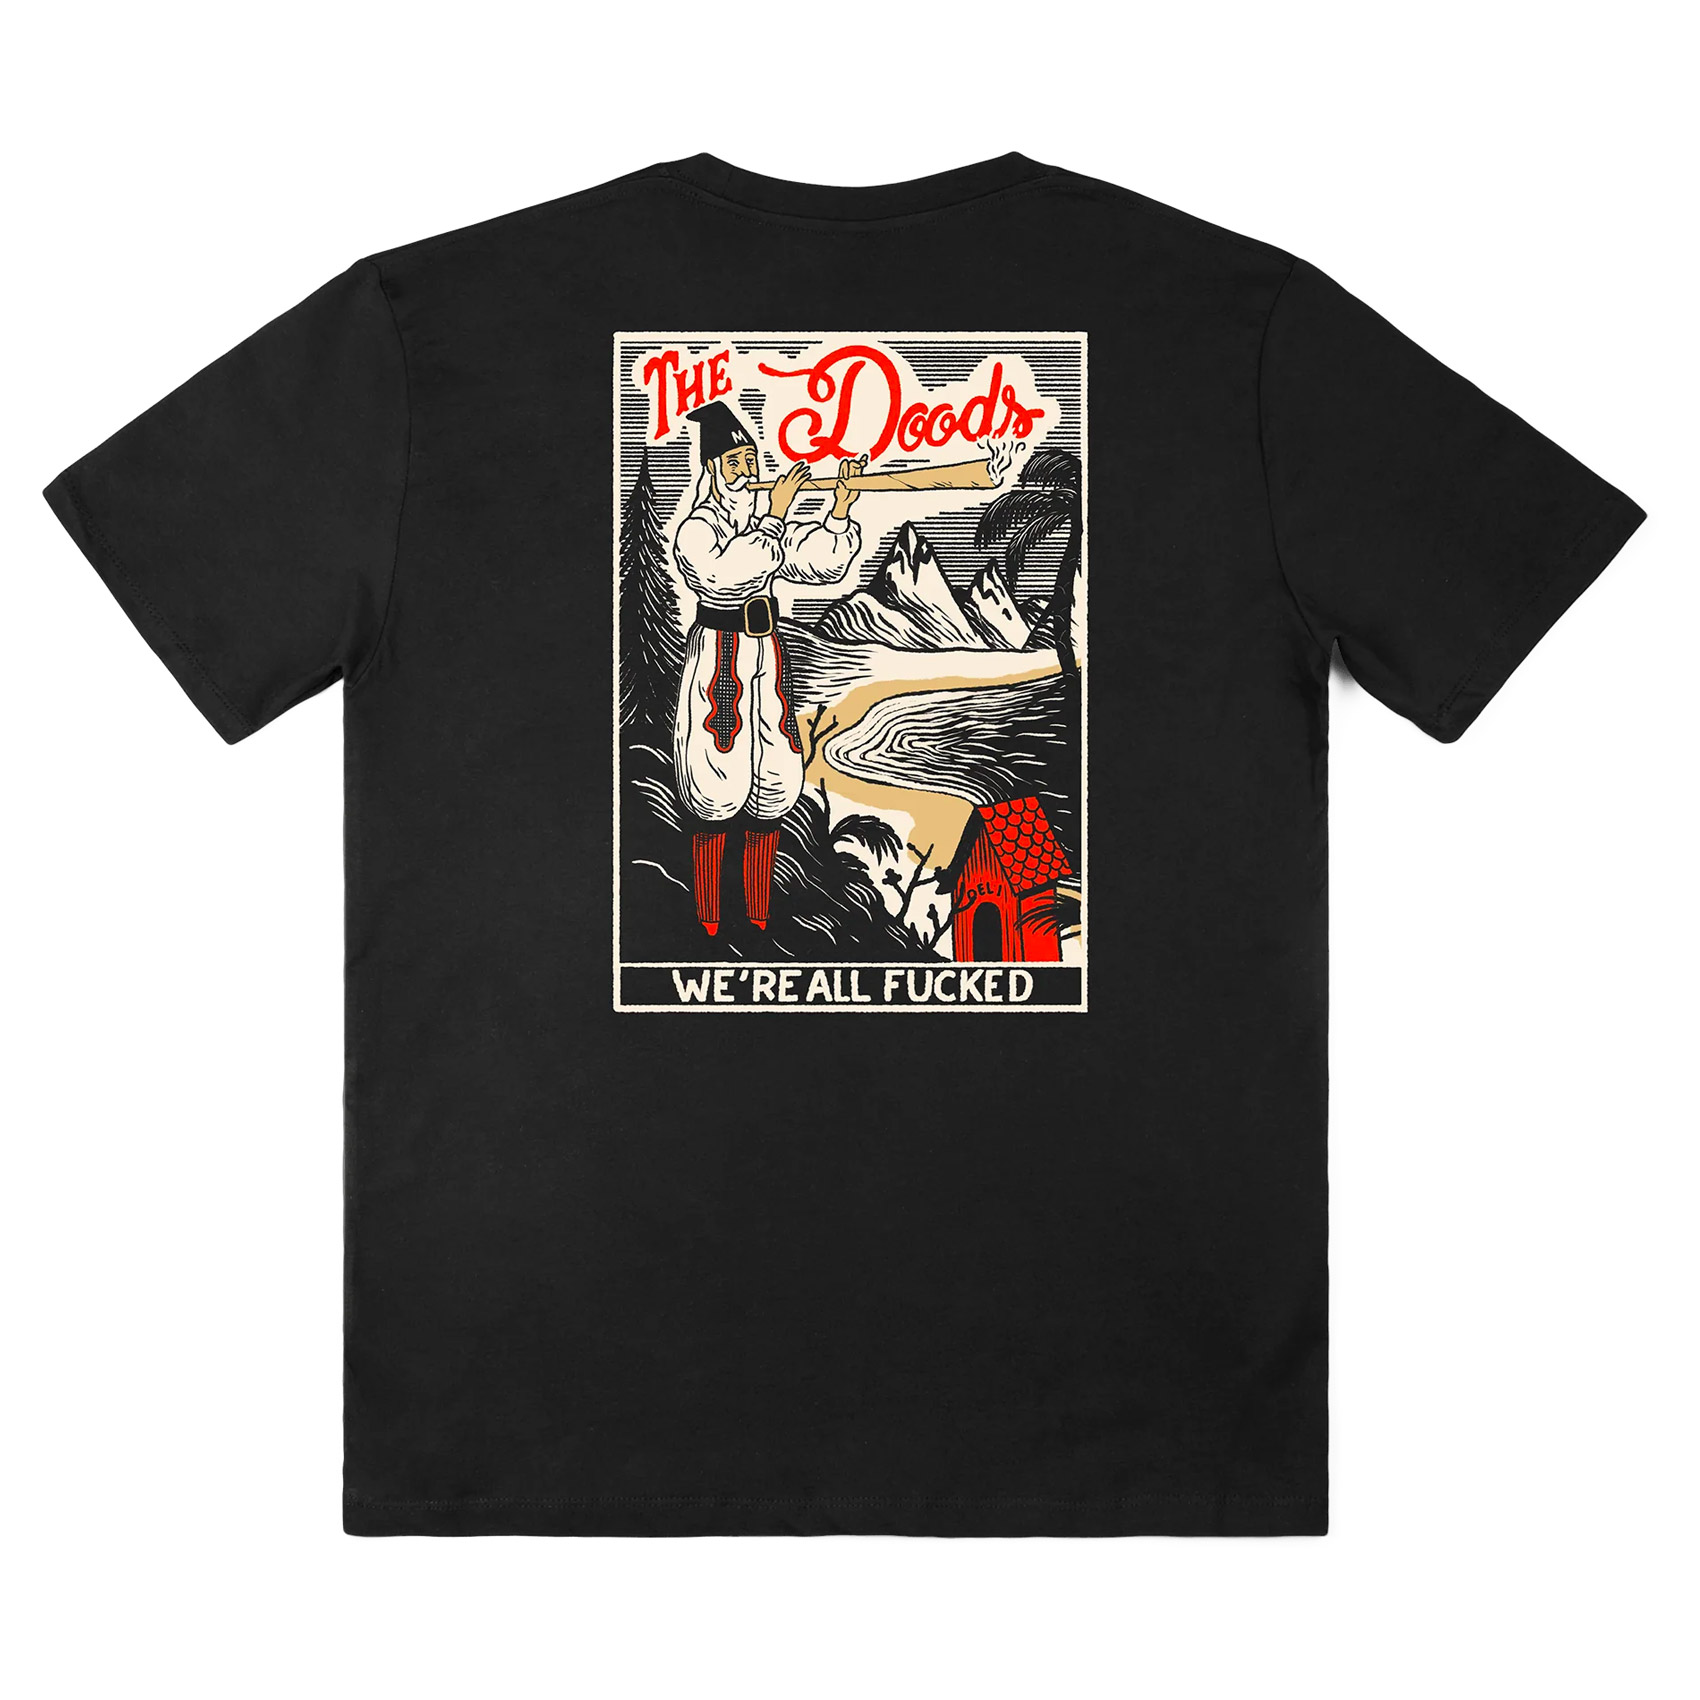 The Dudes T-Shirt All Fucked (black)